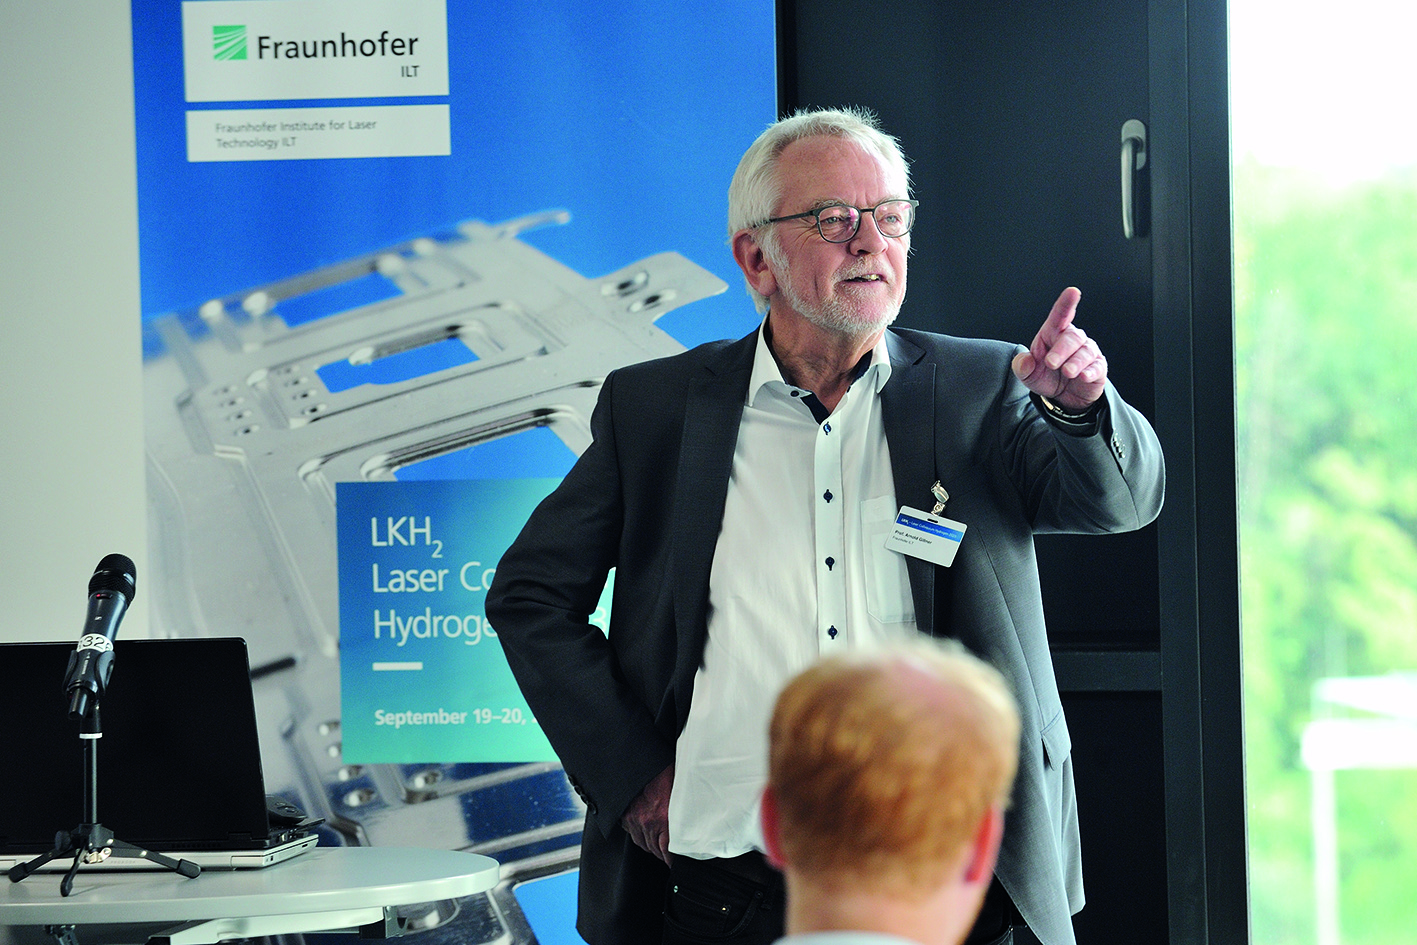 Prof. Arnold Gillner, Head of Business Development Research Markets at Fraunhofer ILT, is planning the new network “Laser in Hydrogen Technology“ and is looking for companies and institutes to rapidly advance hydrogen technology.